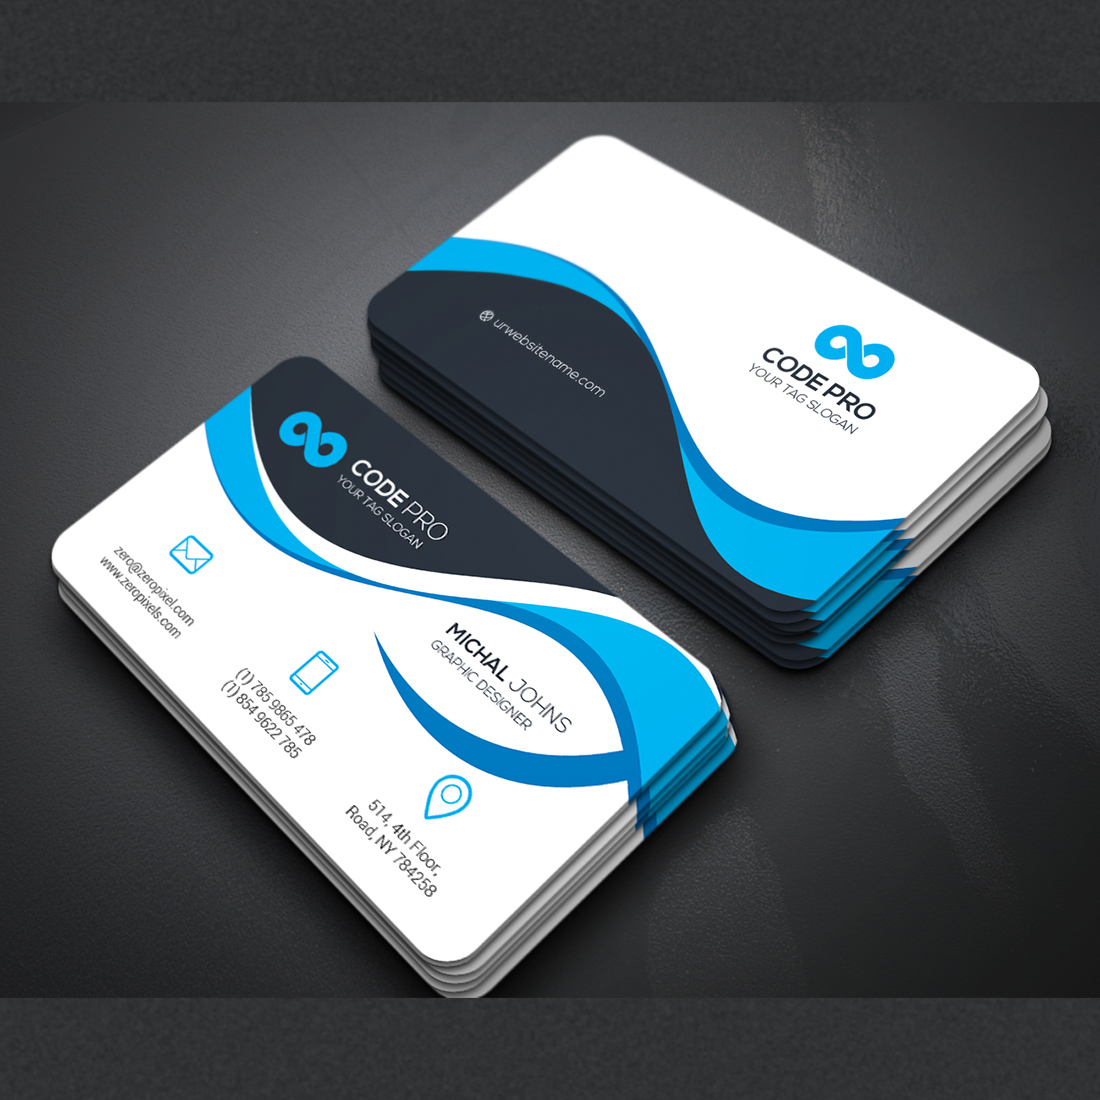 Business cards Template cover image.